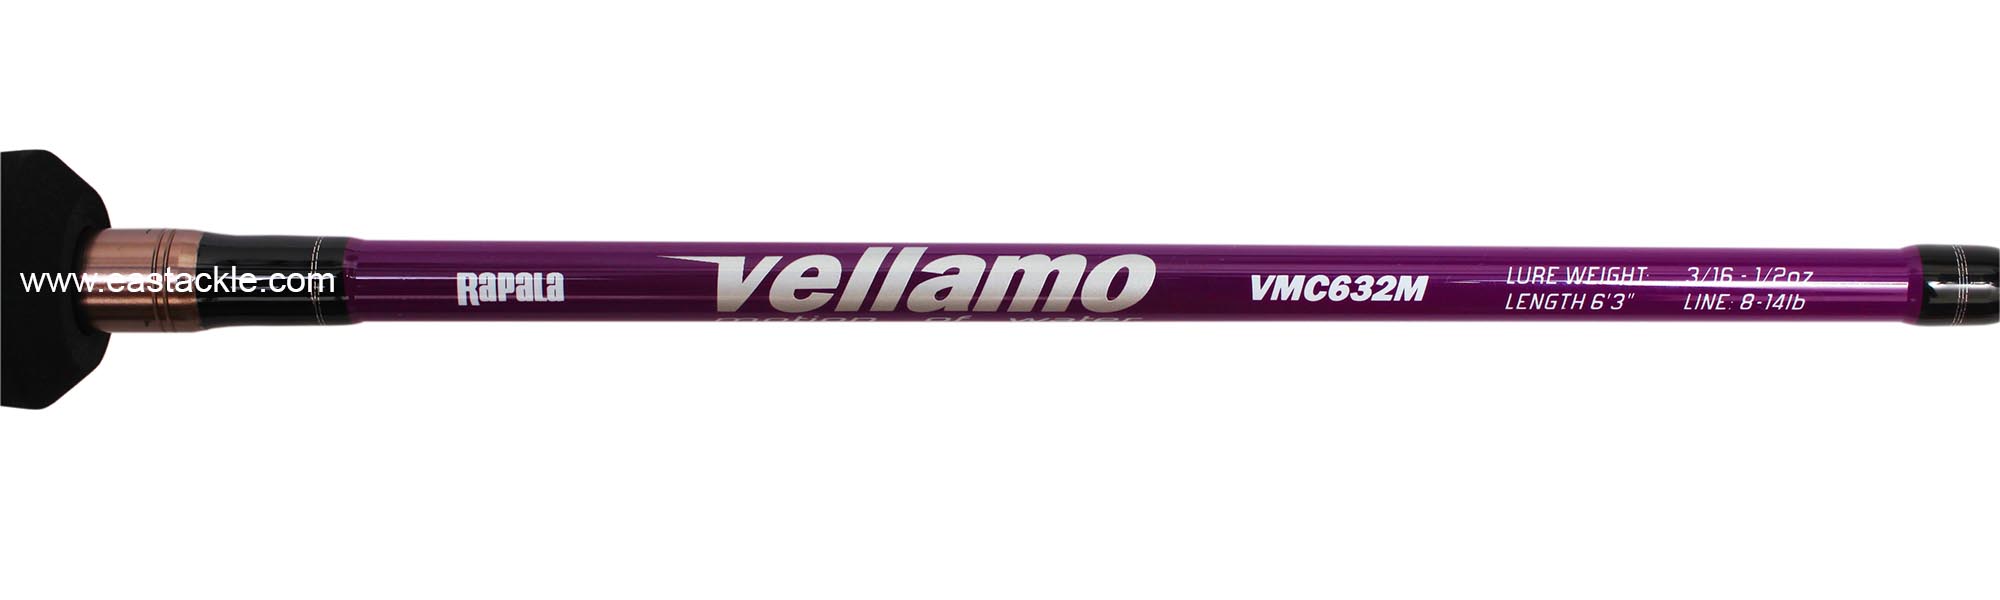 Rapala - Vellamo - VMC632M - Bait Casting Rod - Blank Specifications (Top View) | Eastackle